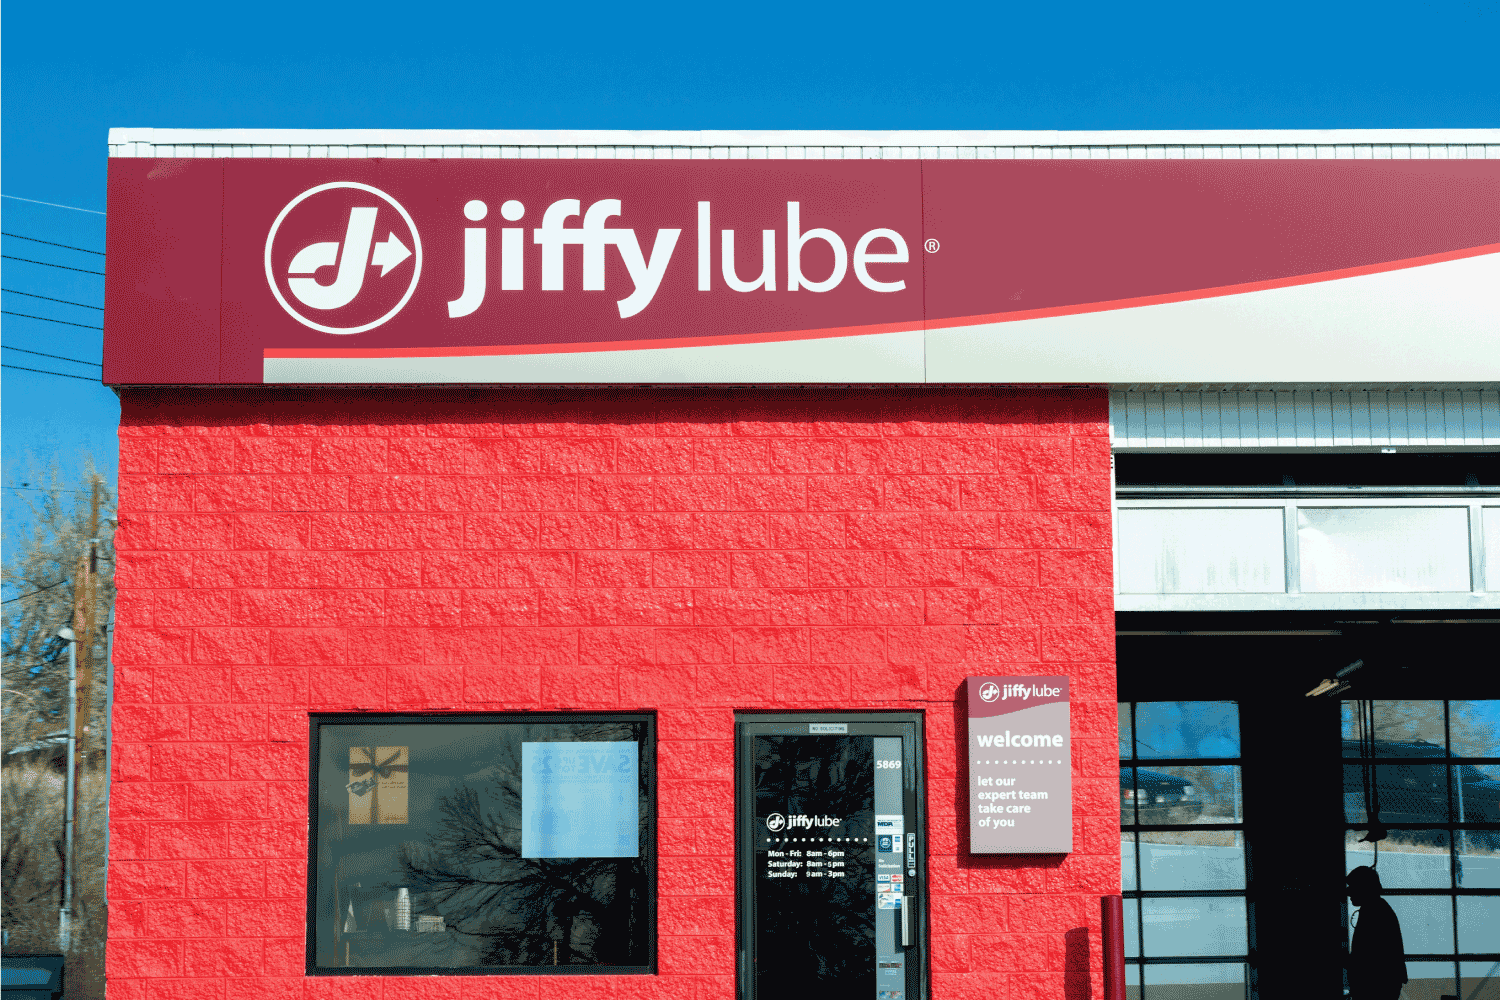 Jiffy Lube location in Denver, Colorado. Jiffy Lube, a subsidiary of Shell Oil, is a chain of automotive service centers with over 2,000 locations.